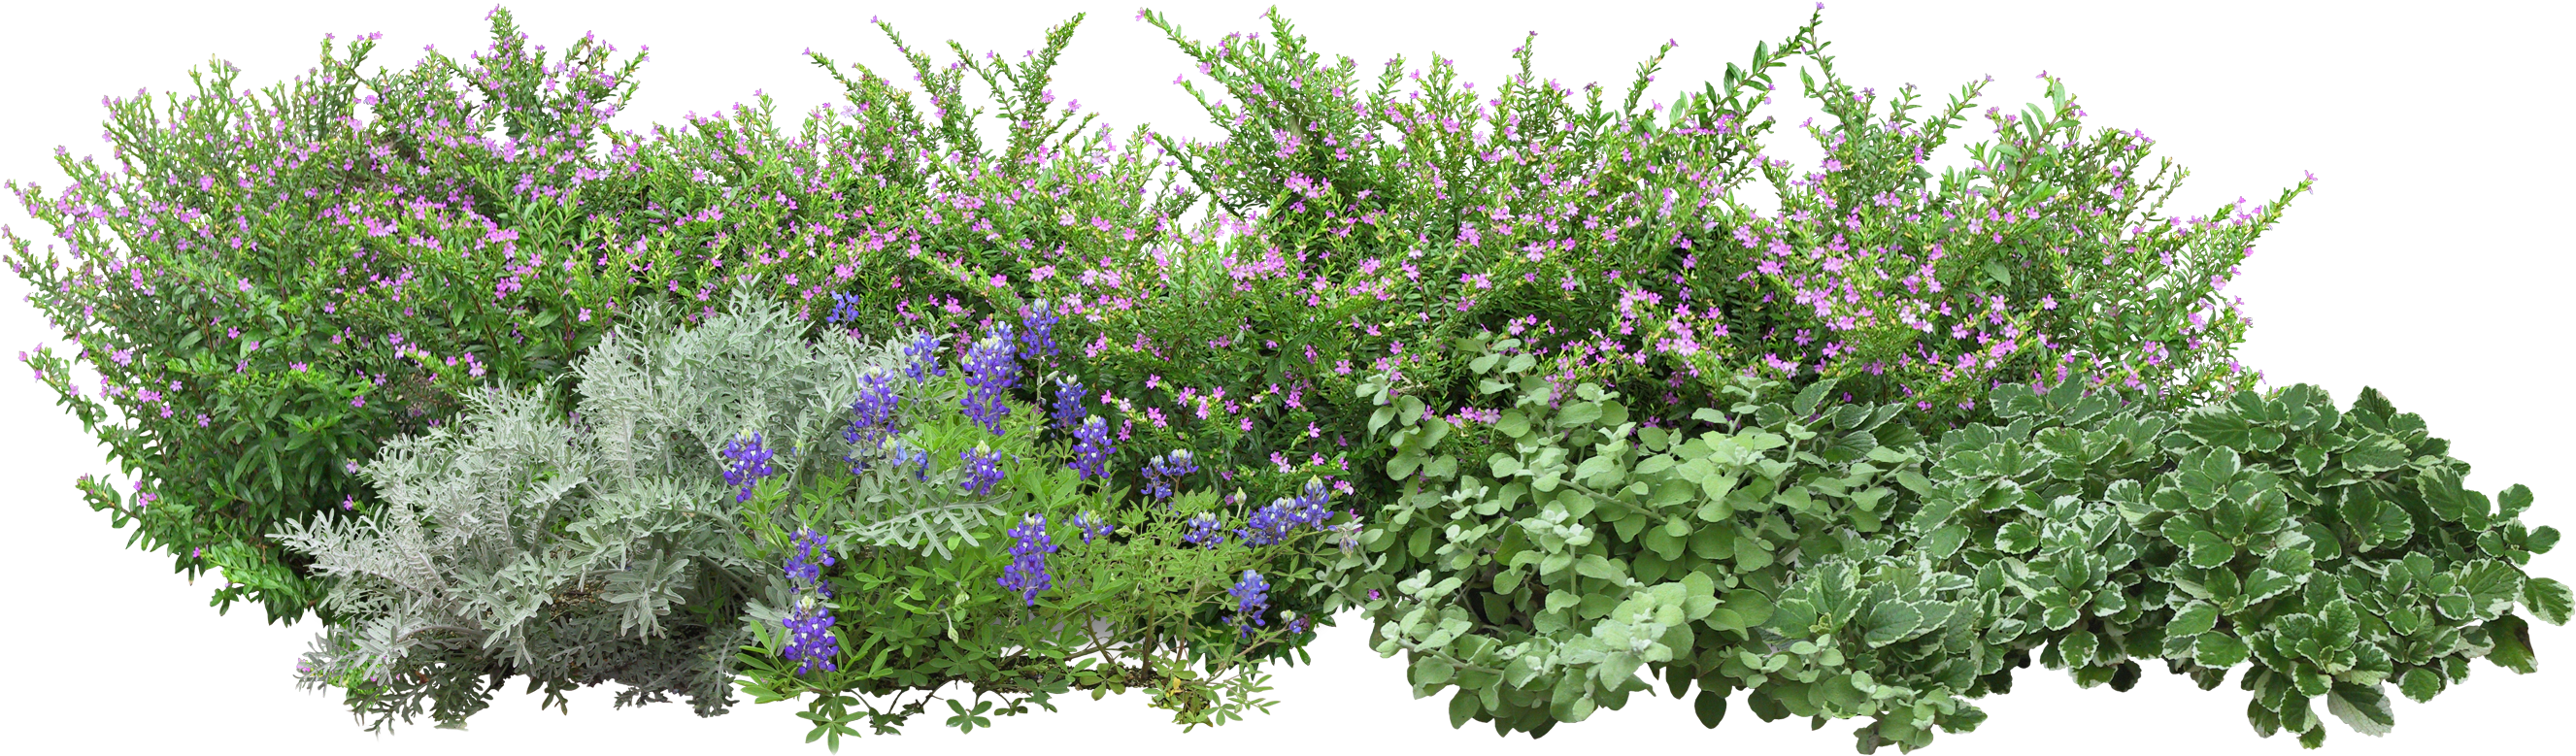 A Group Of Purple And Green Plants